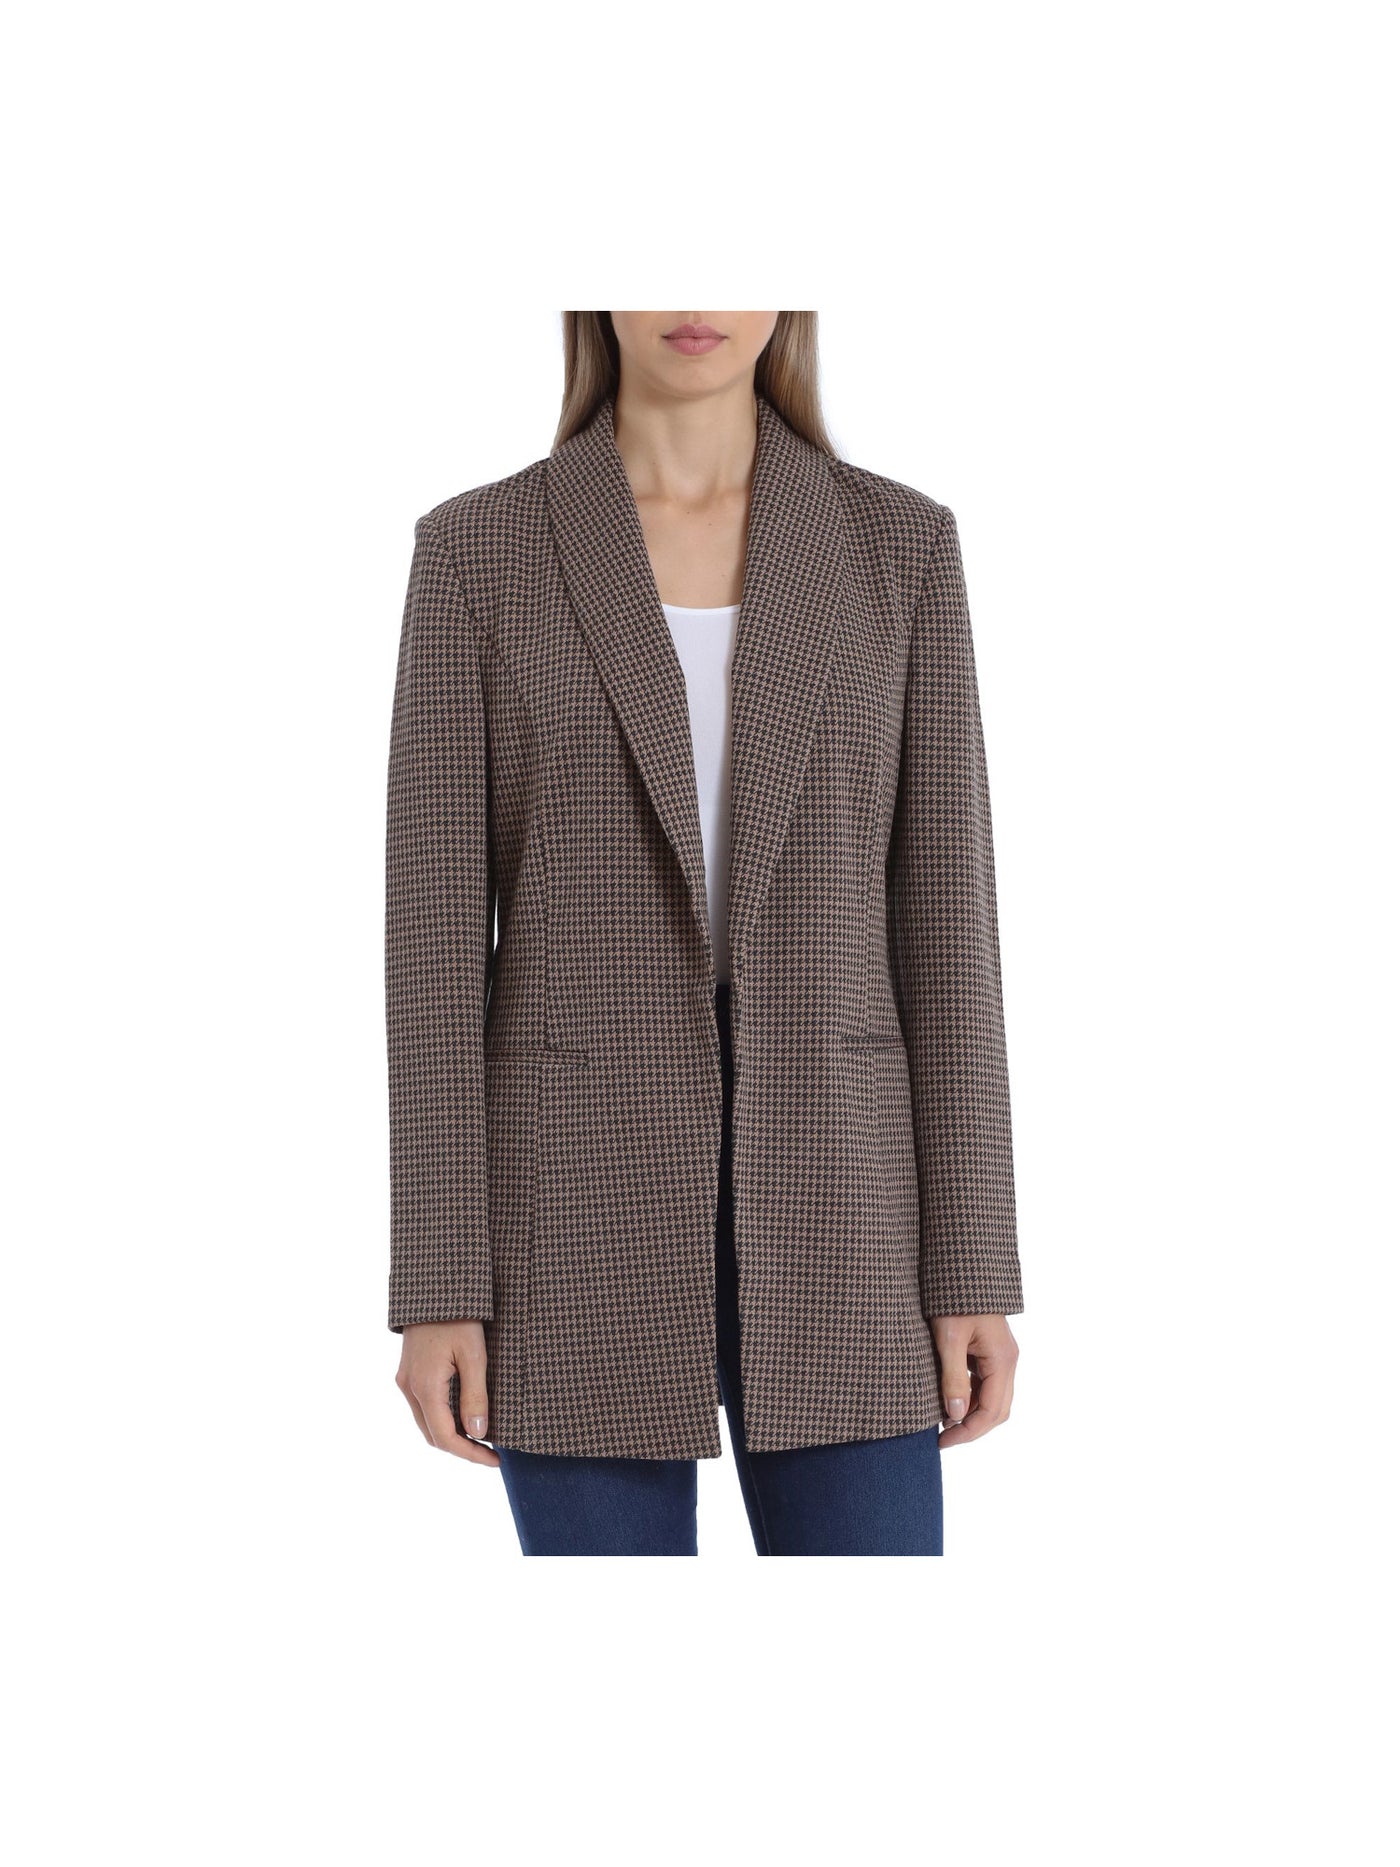 BAGATELLE Womens Brown Open Front Pocketed Shawl Collar Unlined Houndstooth Wear To Work Blazer Jacket S